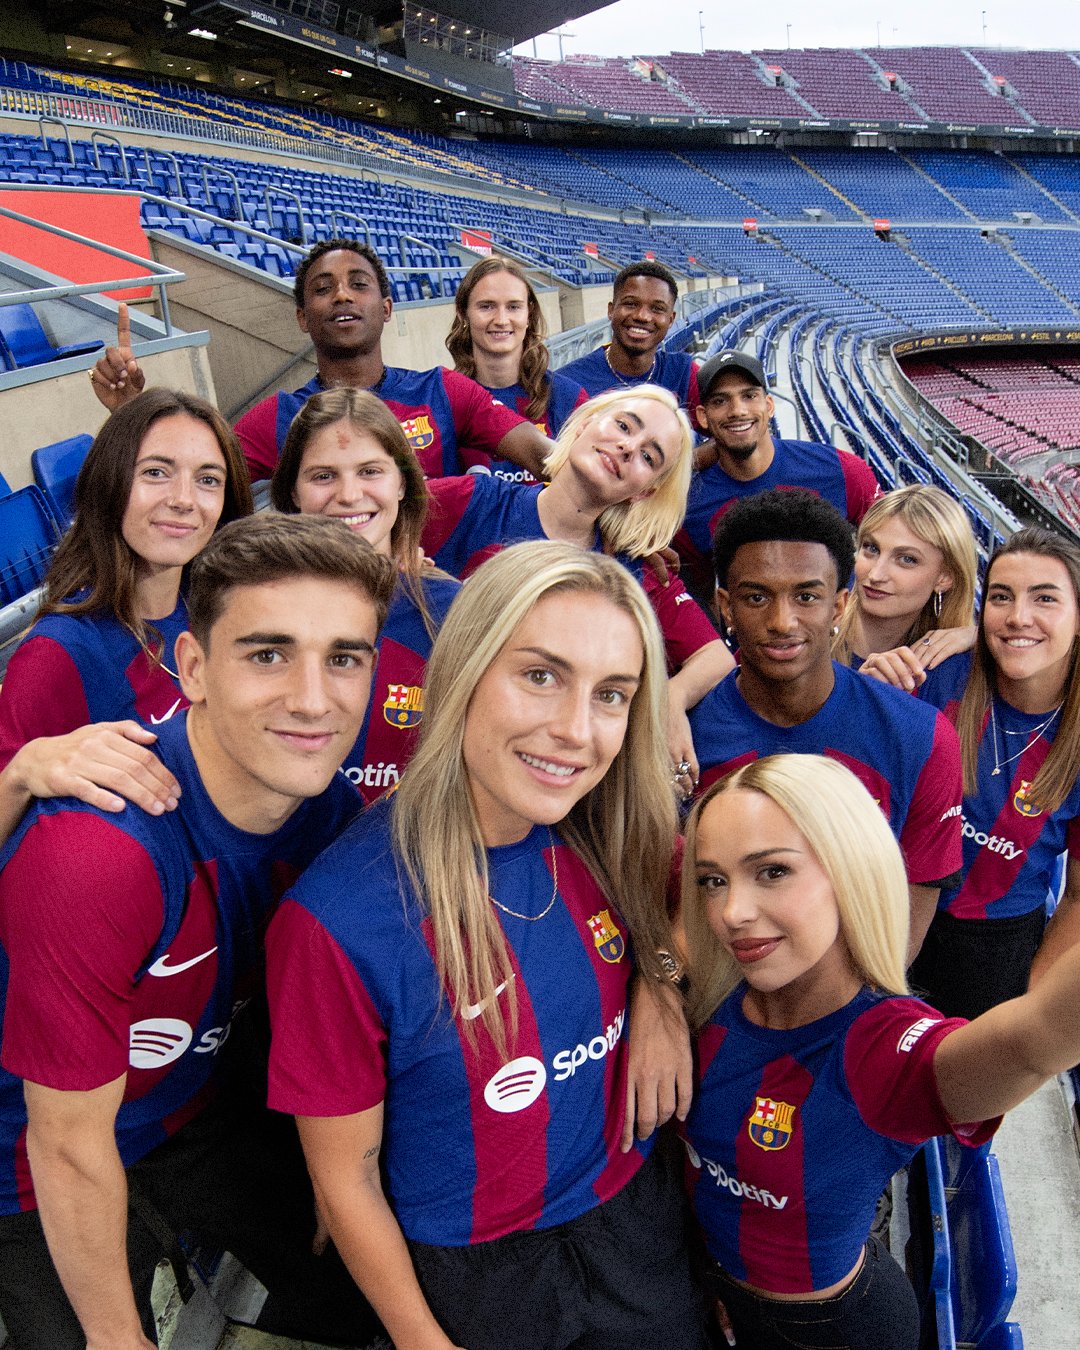 Barcelona closing in on €1.3b sponsorship deal with Nike